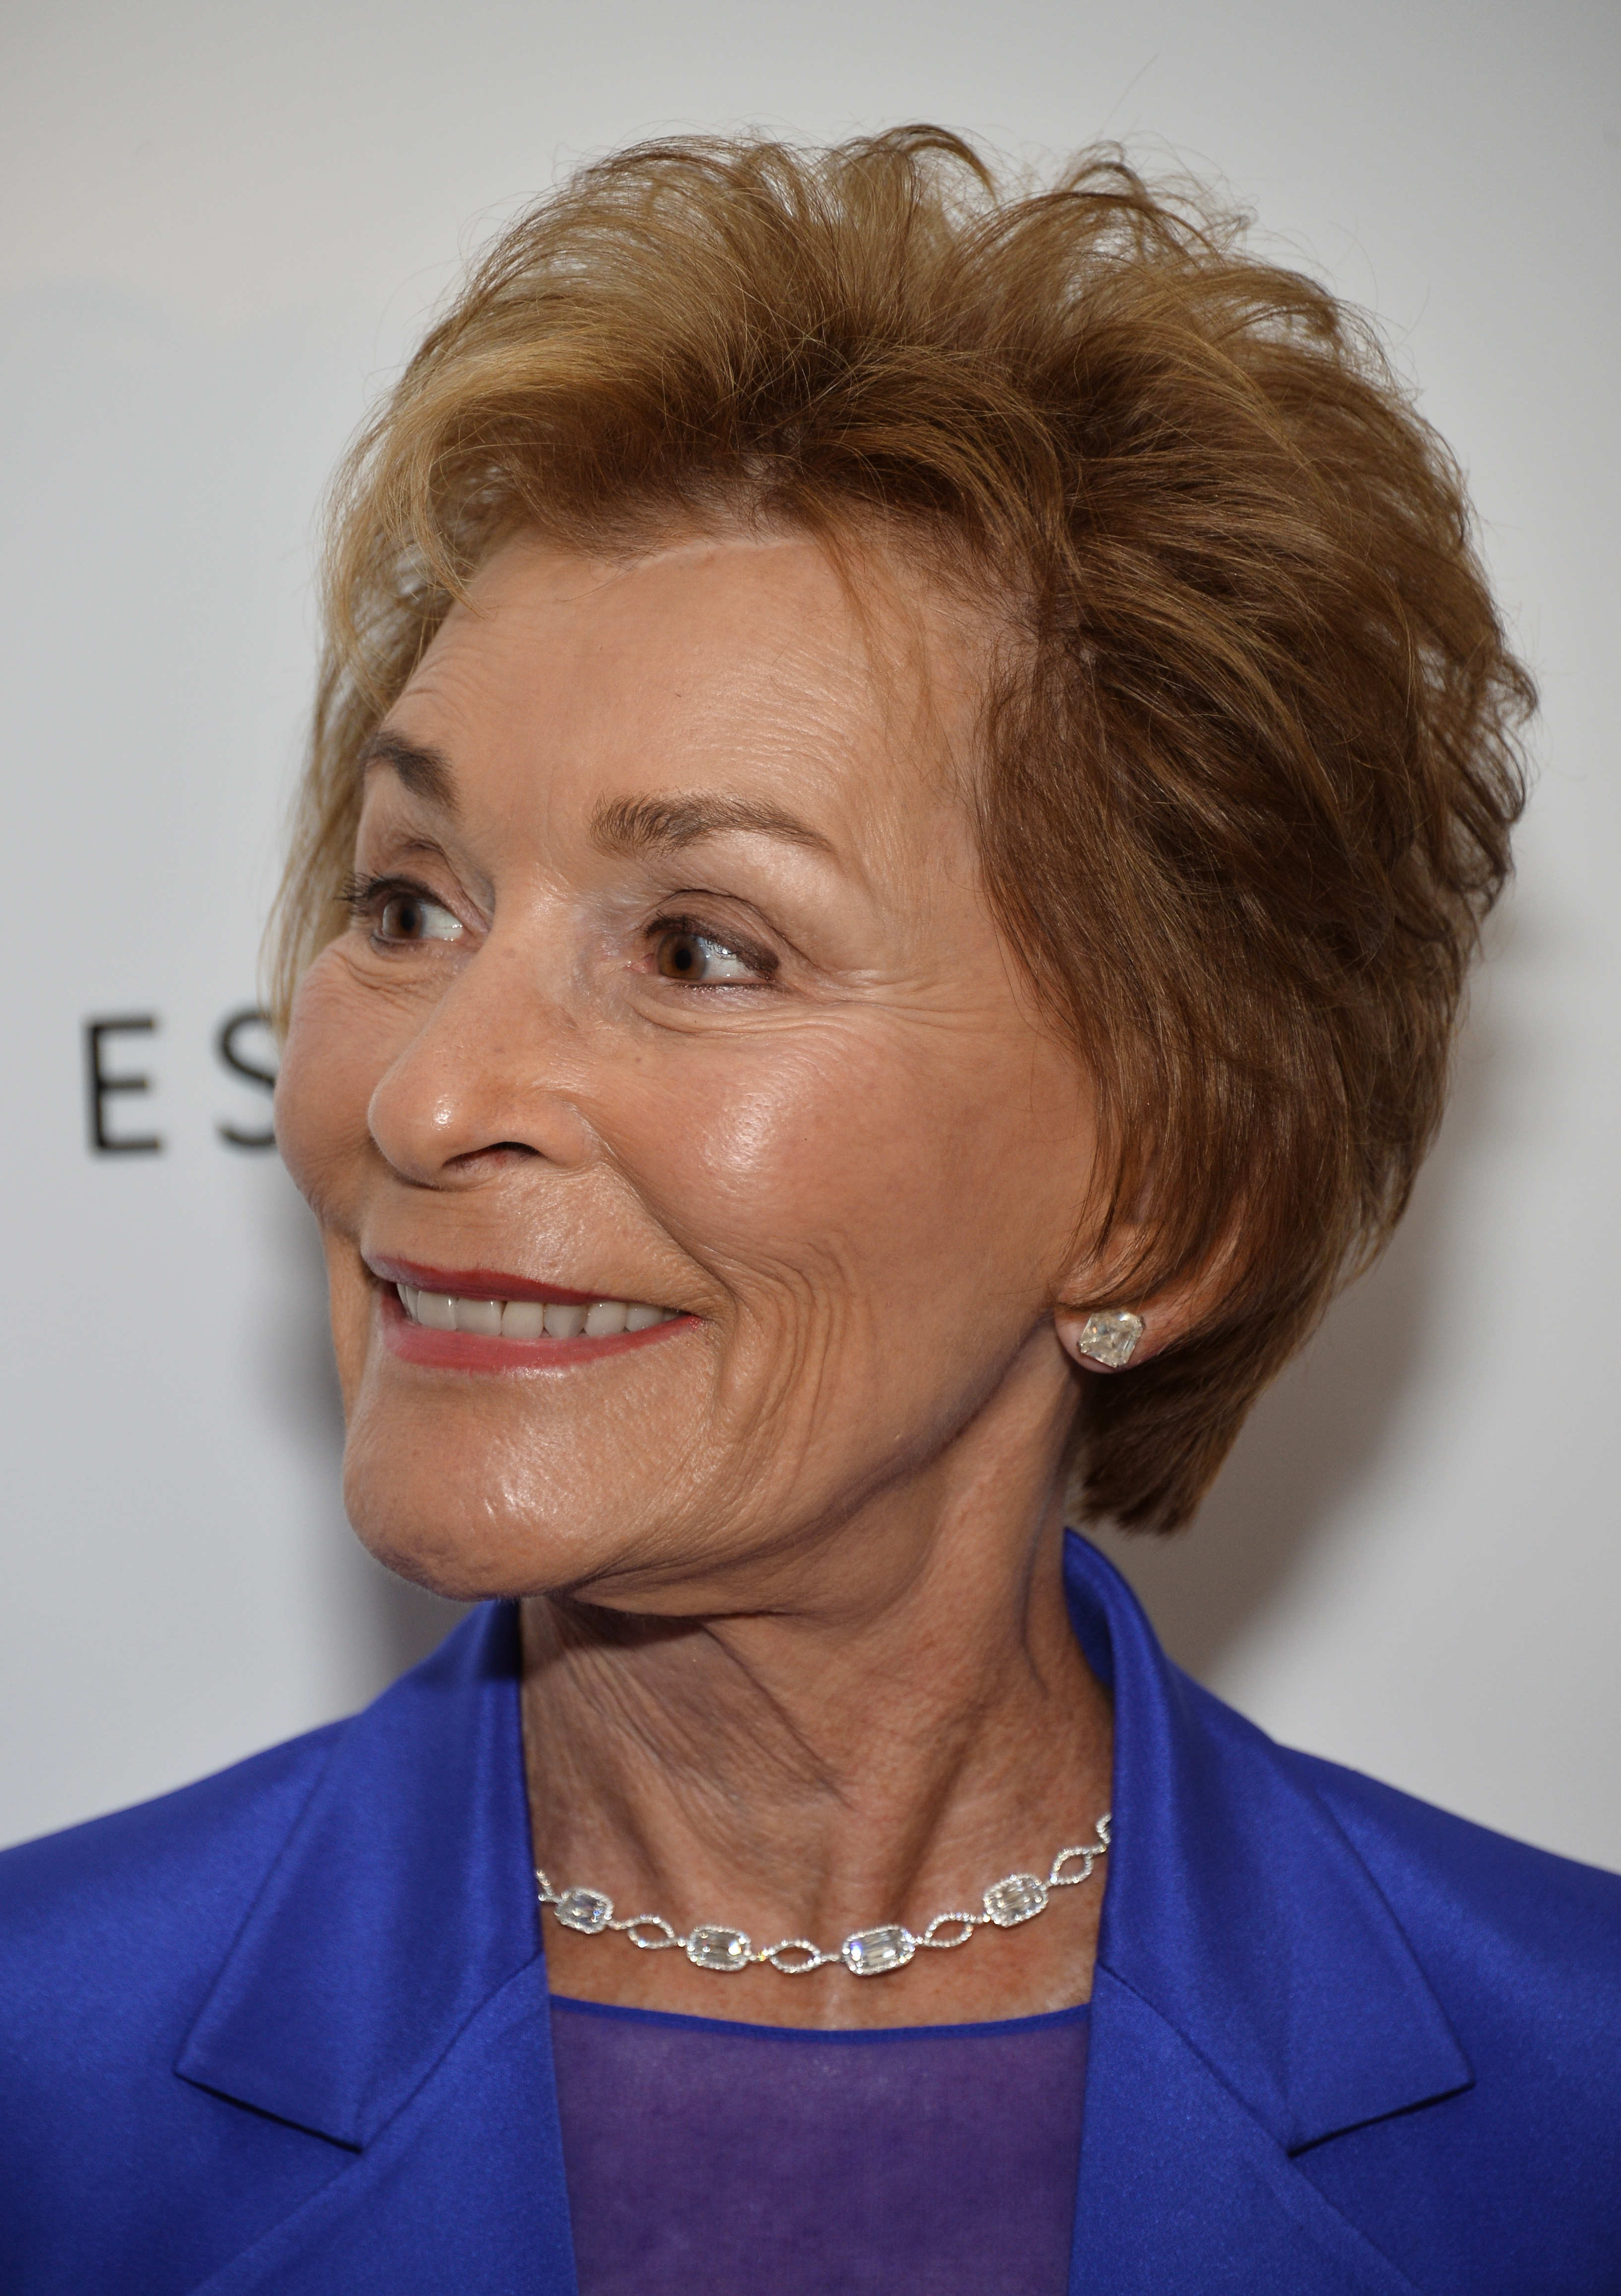 Judge Judy at the Women's Guild Cedars-Sinai's Annual Luncheon in California in 2015 | Source: Getty Images